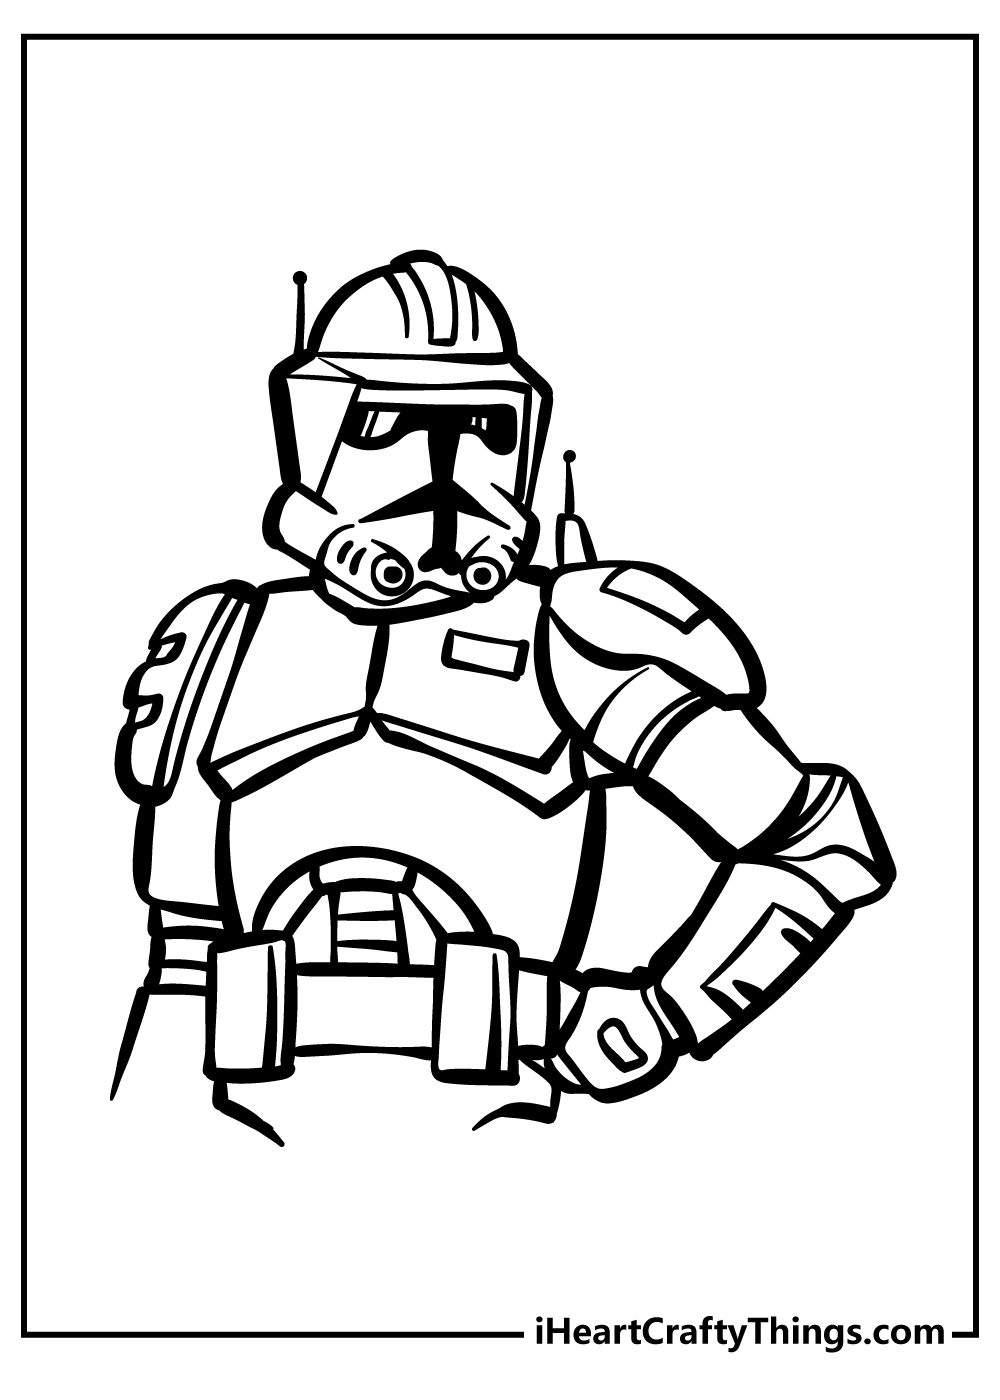 Star Wars Coloring Book for adults free download